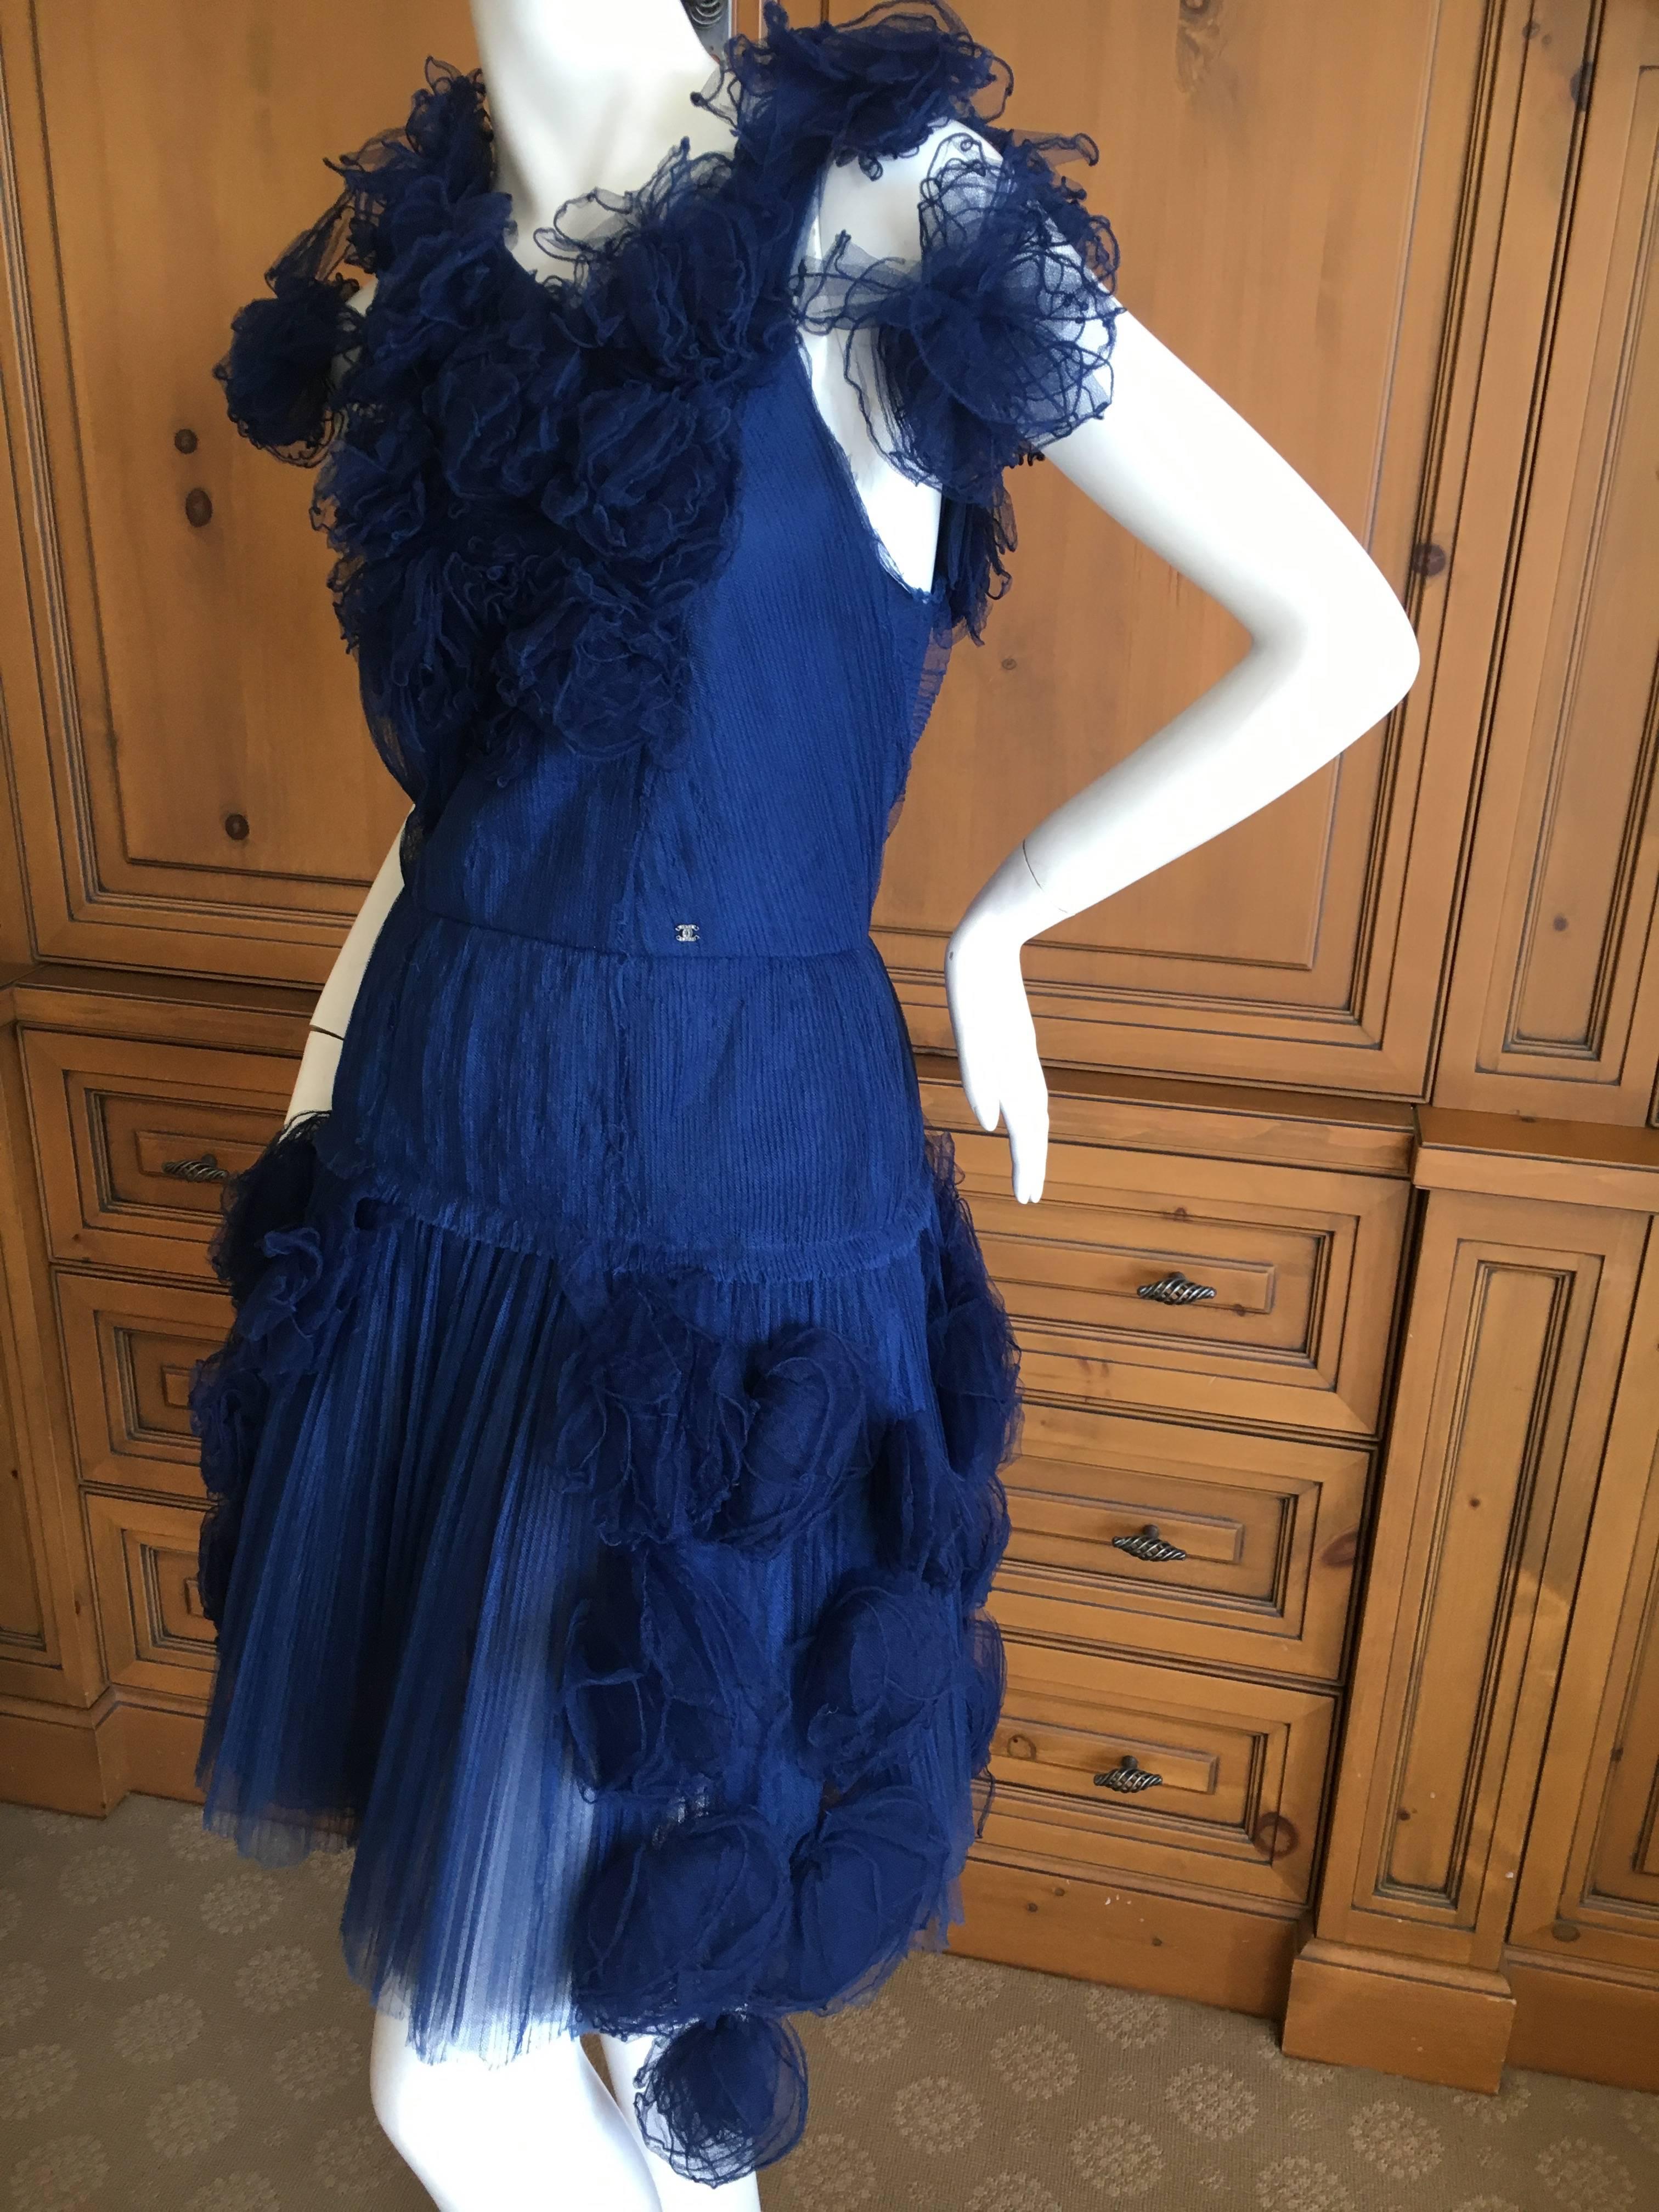 Chanel Romantic Vintage Blue Tulle Dress with Rosettes
This is so pretty, the photos don't do it justice .
Chanel label removed.
Size 36
Bust 34" Waist 27" Hips 40" Length 40" Excellent condition